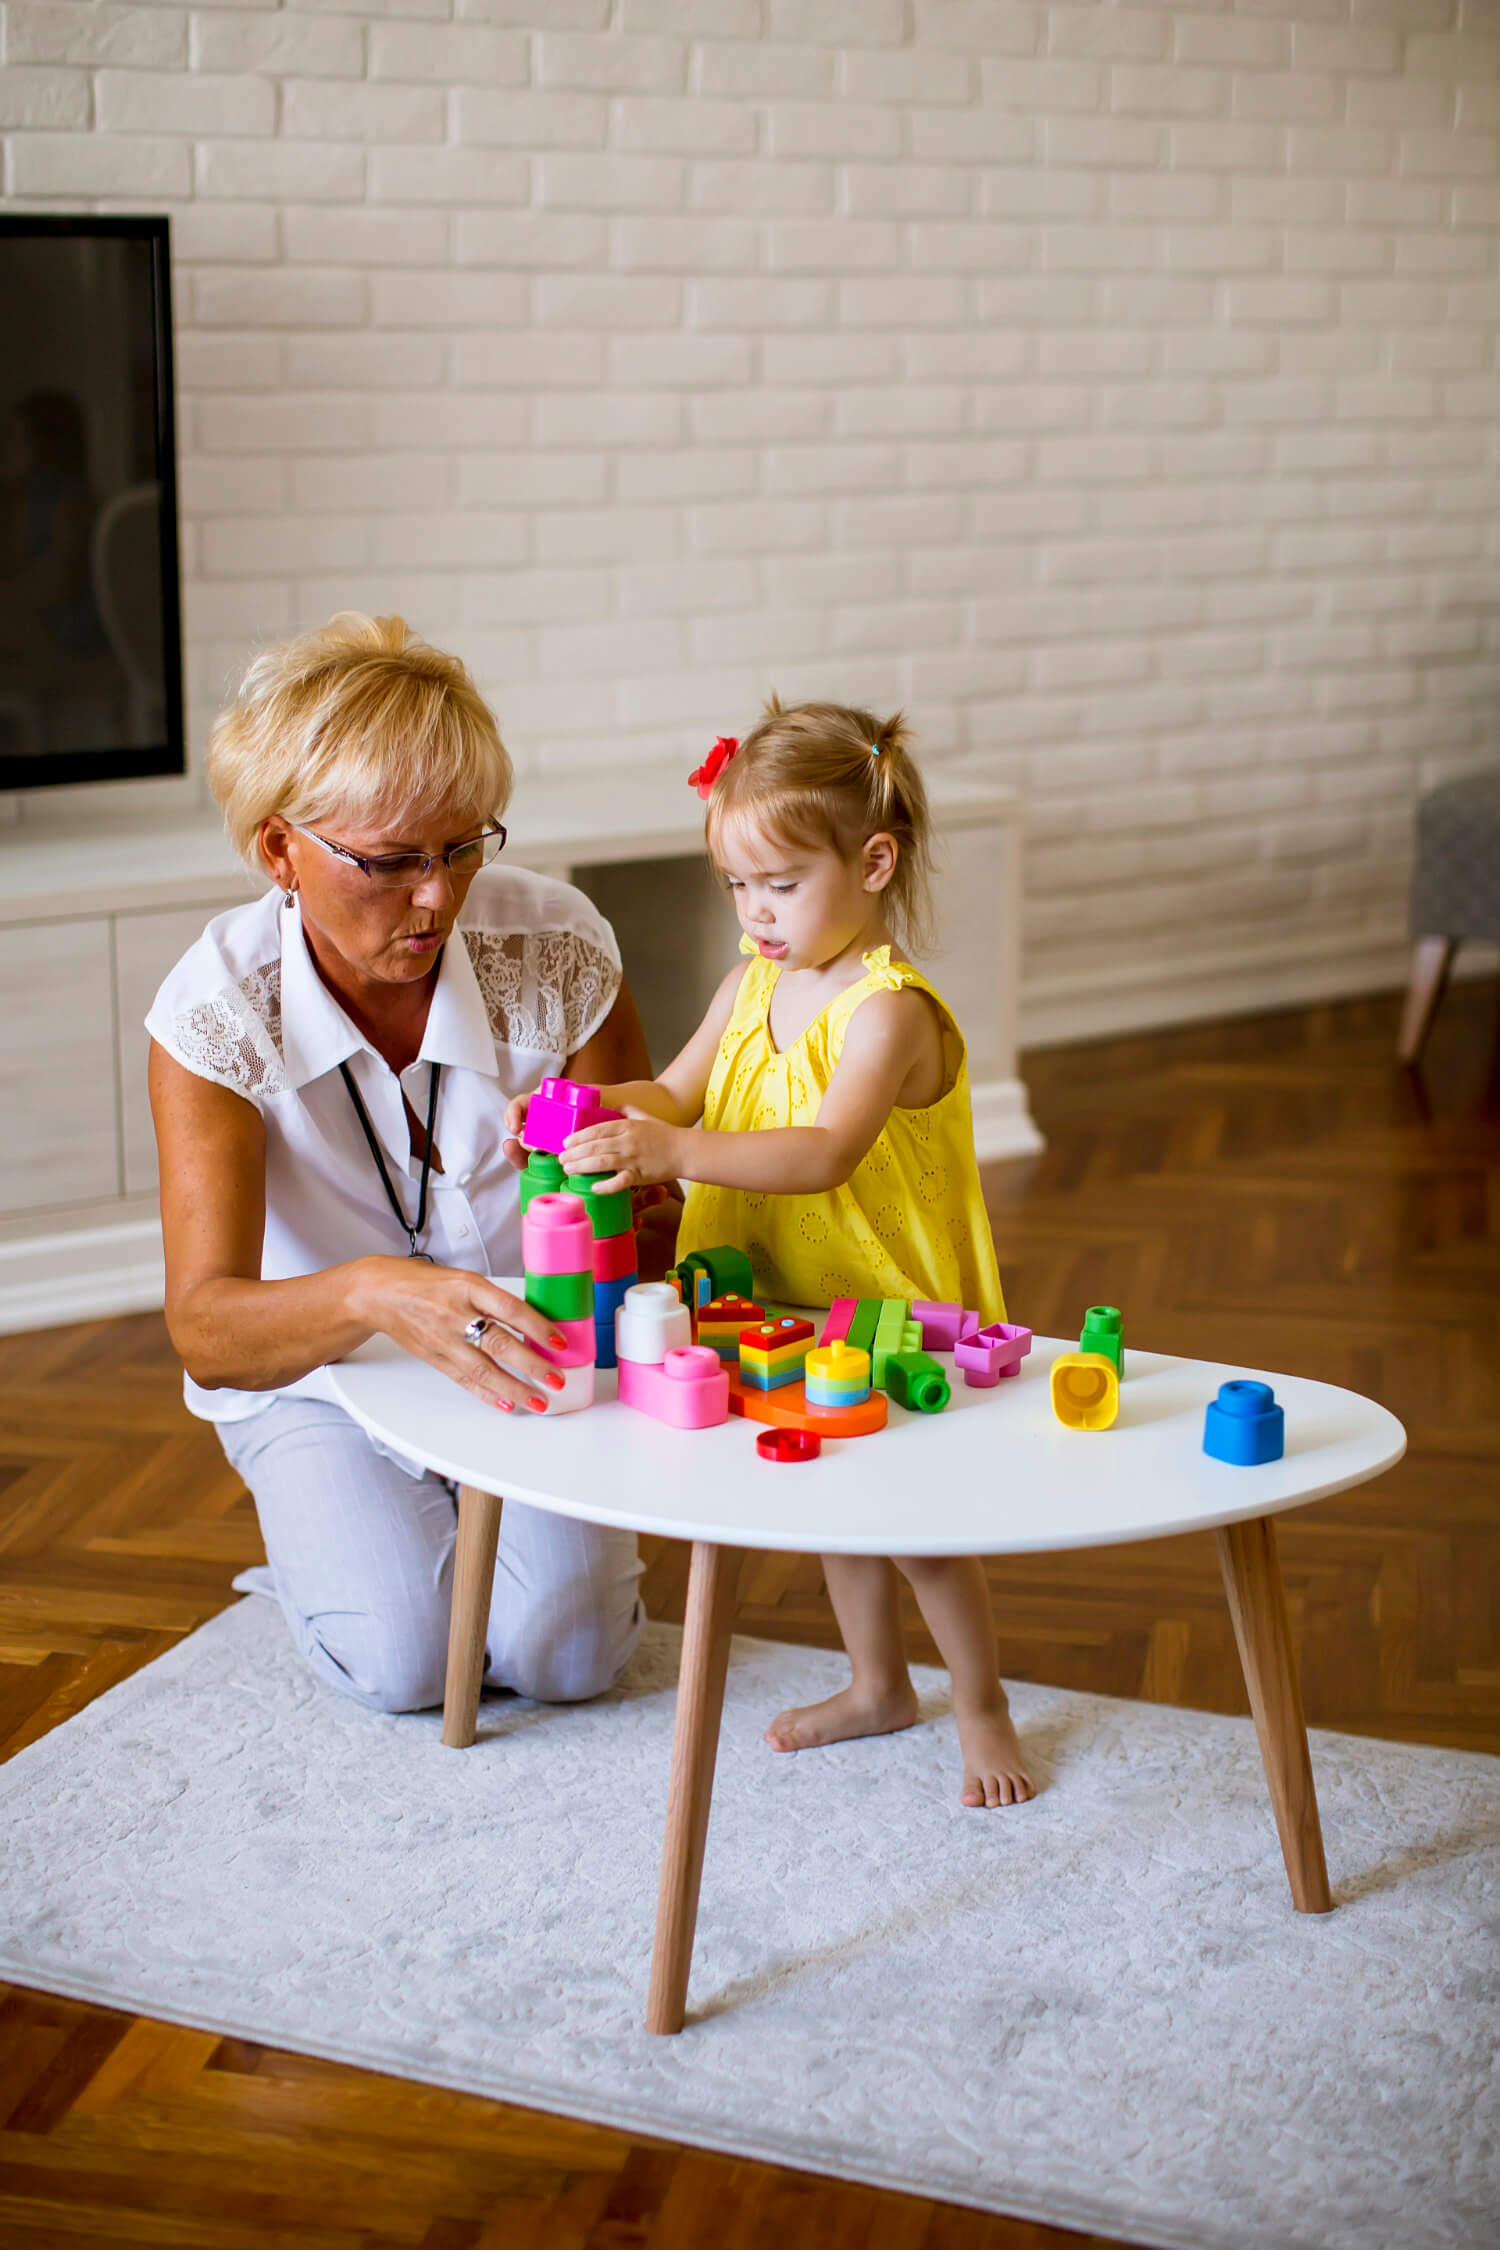 An older woman and a young girl are playing with colorful stacking toys on a white table in a living room with a brick wall and wooden floor.